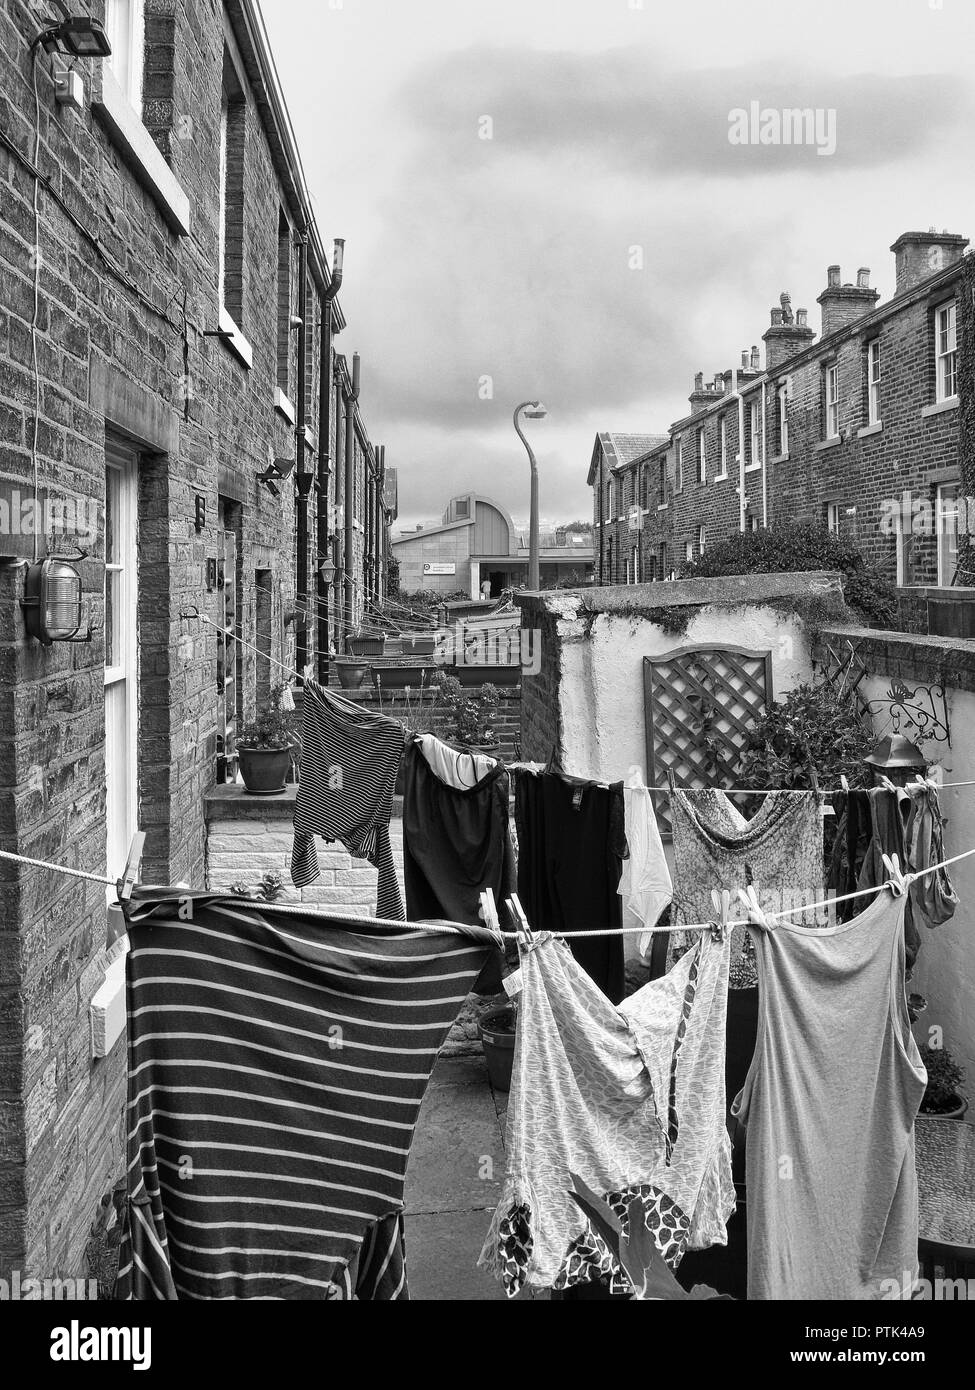 Washing hanging in the back yards of terraced houses at Saltaire, Bradford, Yorkshire Stock Photo